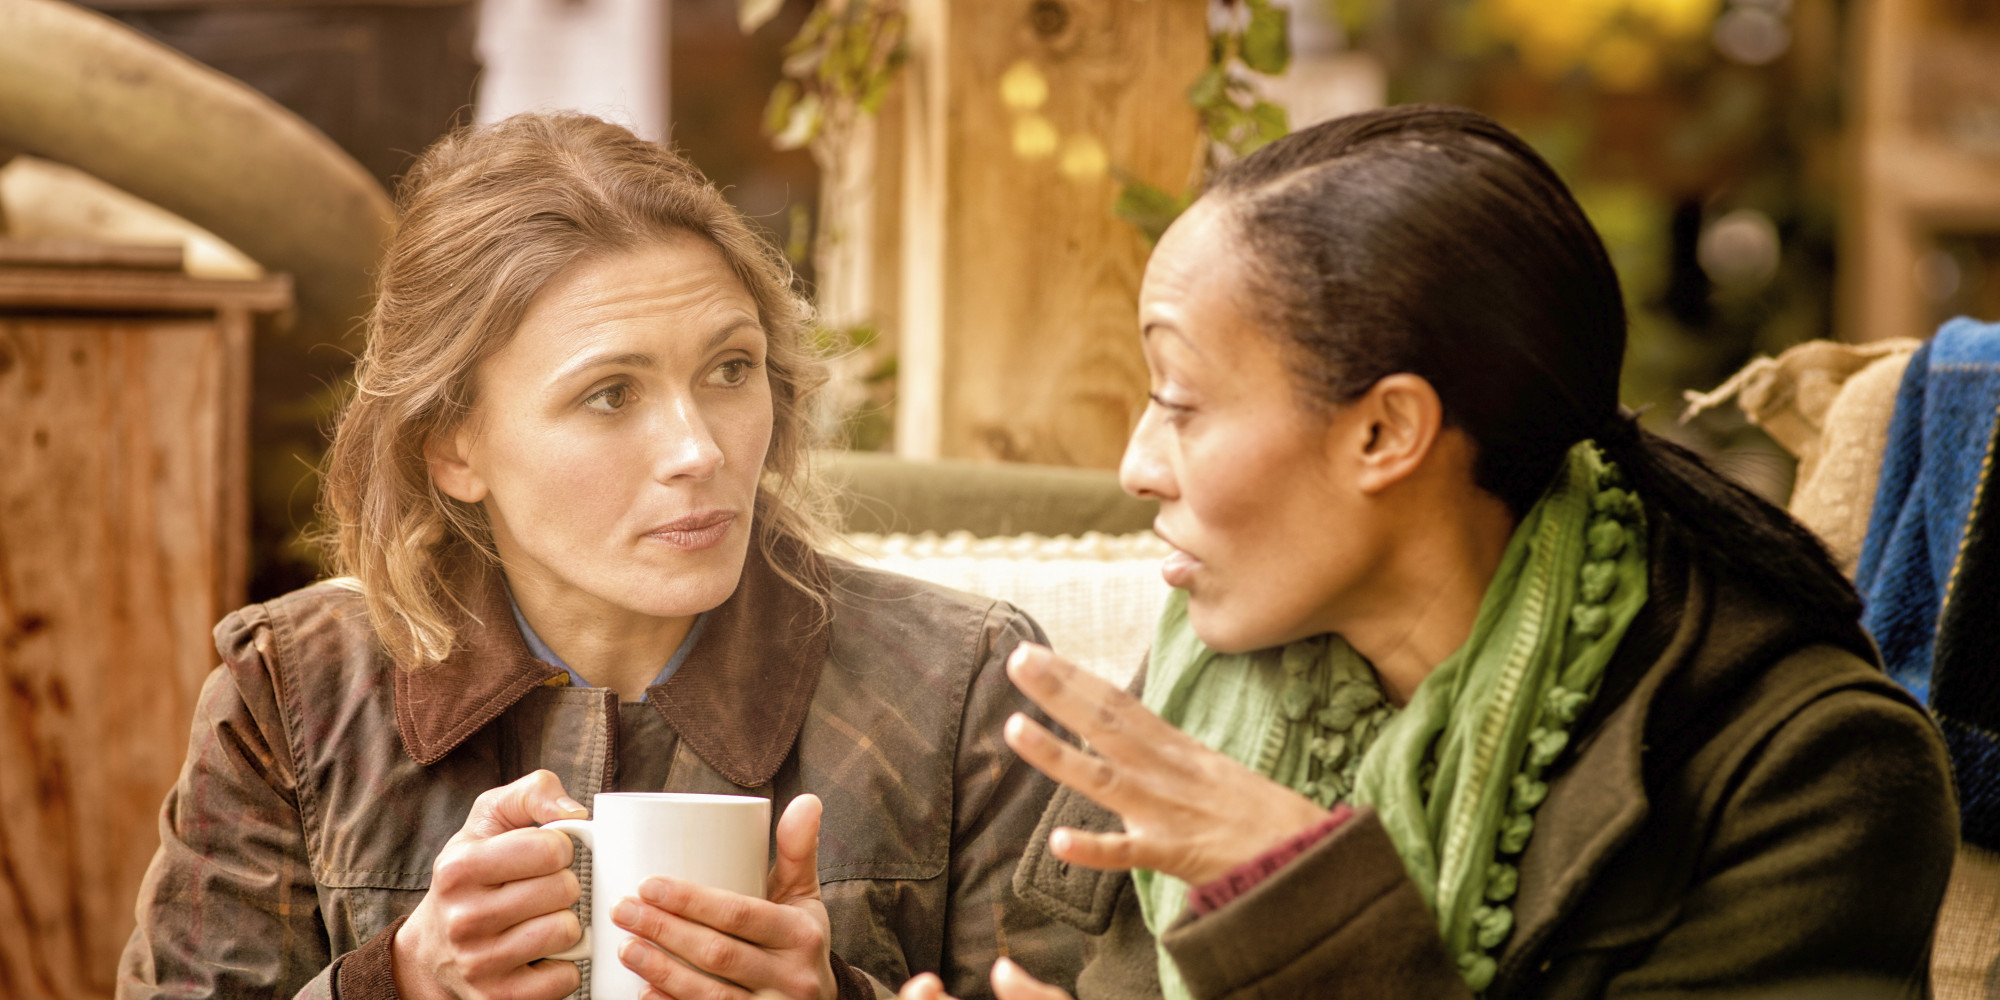 How To Talk To A Friend About Her Not Awesome Relationship Huffpost